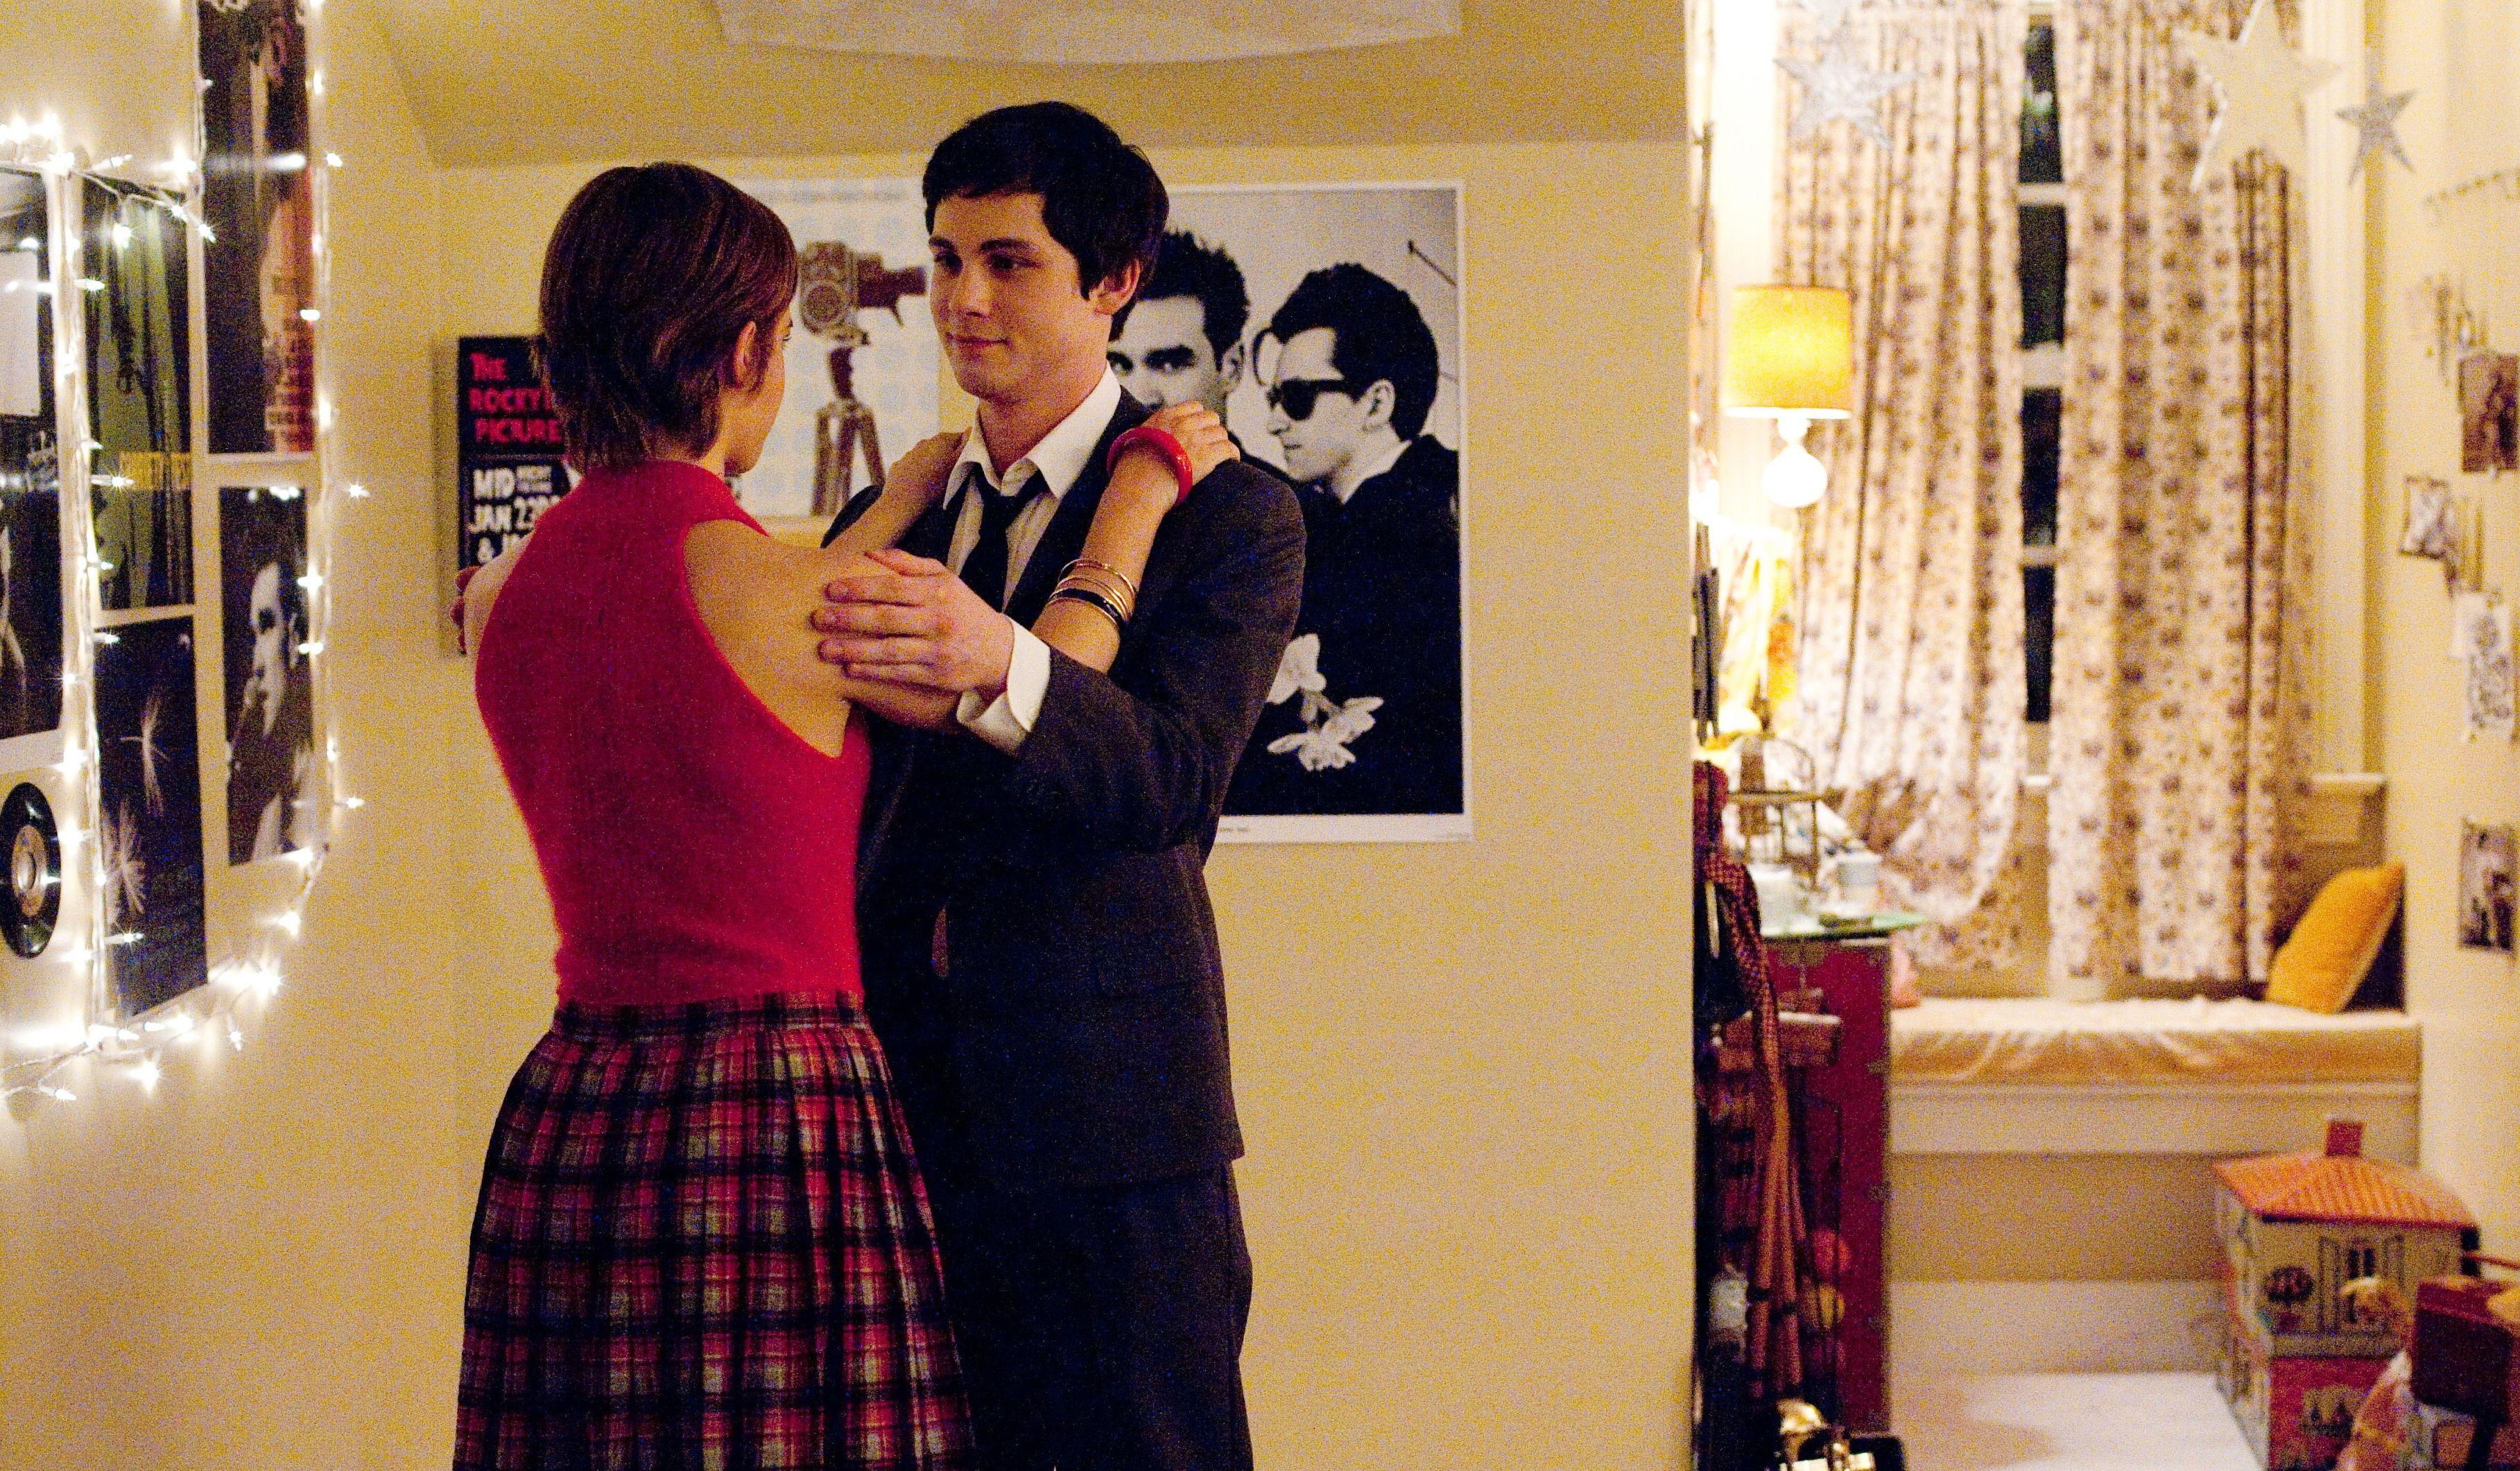 THE PERKS OF BEING A WALLFLOWER Image, Featuring Emma Watson